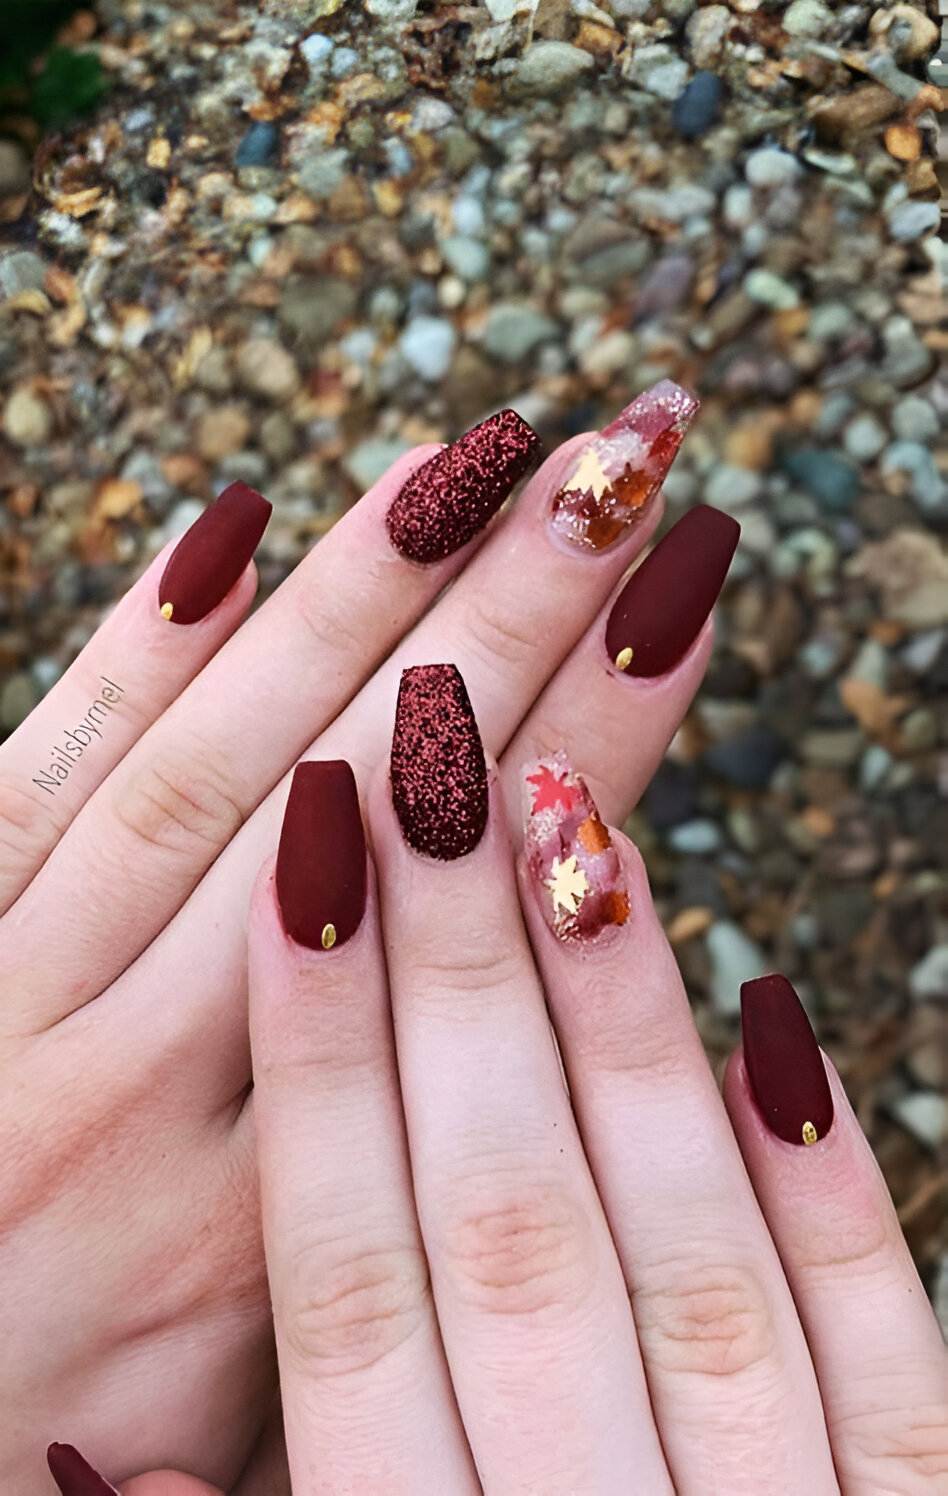 30 Autumn Nail Designs Too Chic To Resist - 207